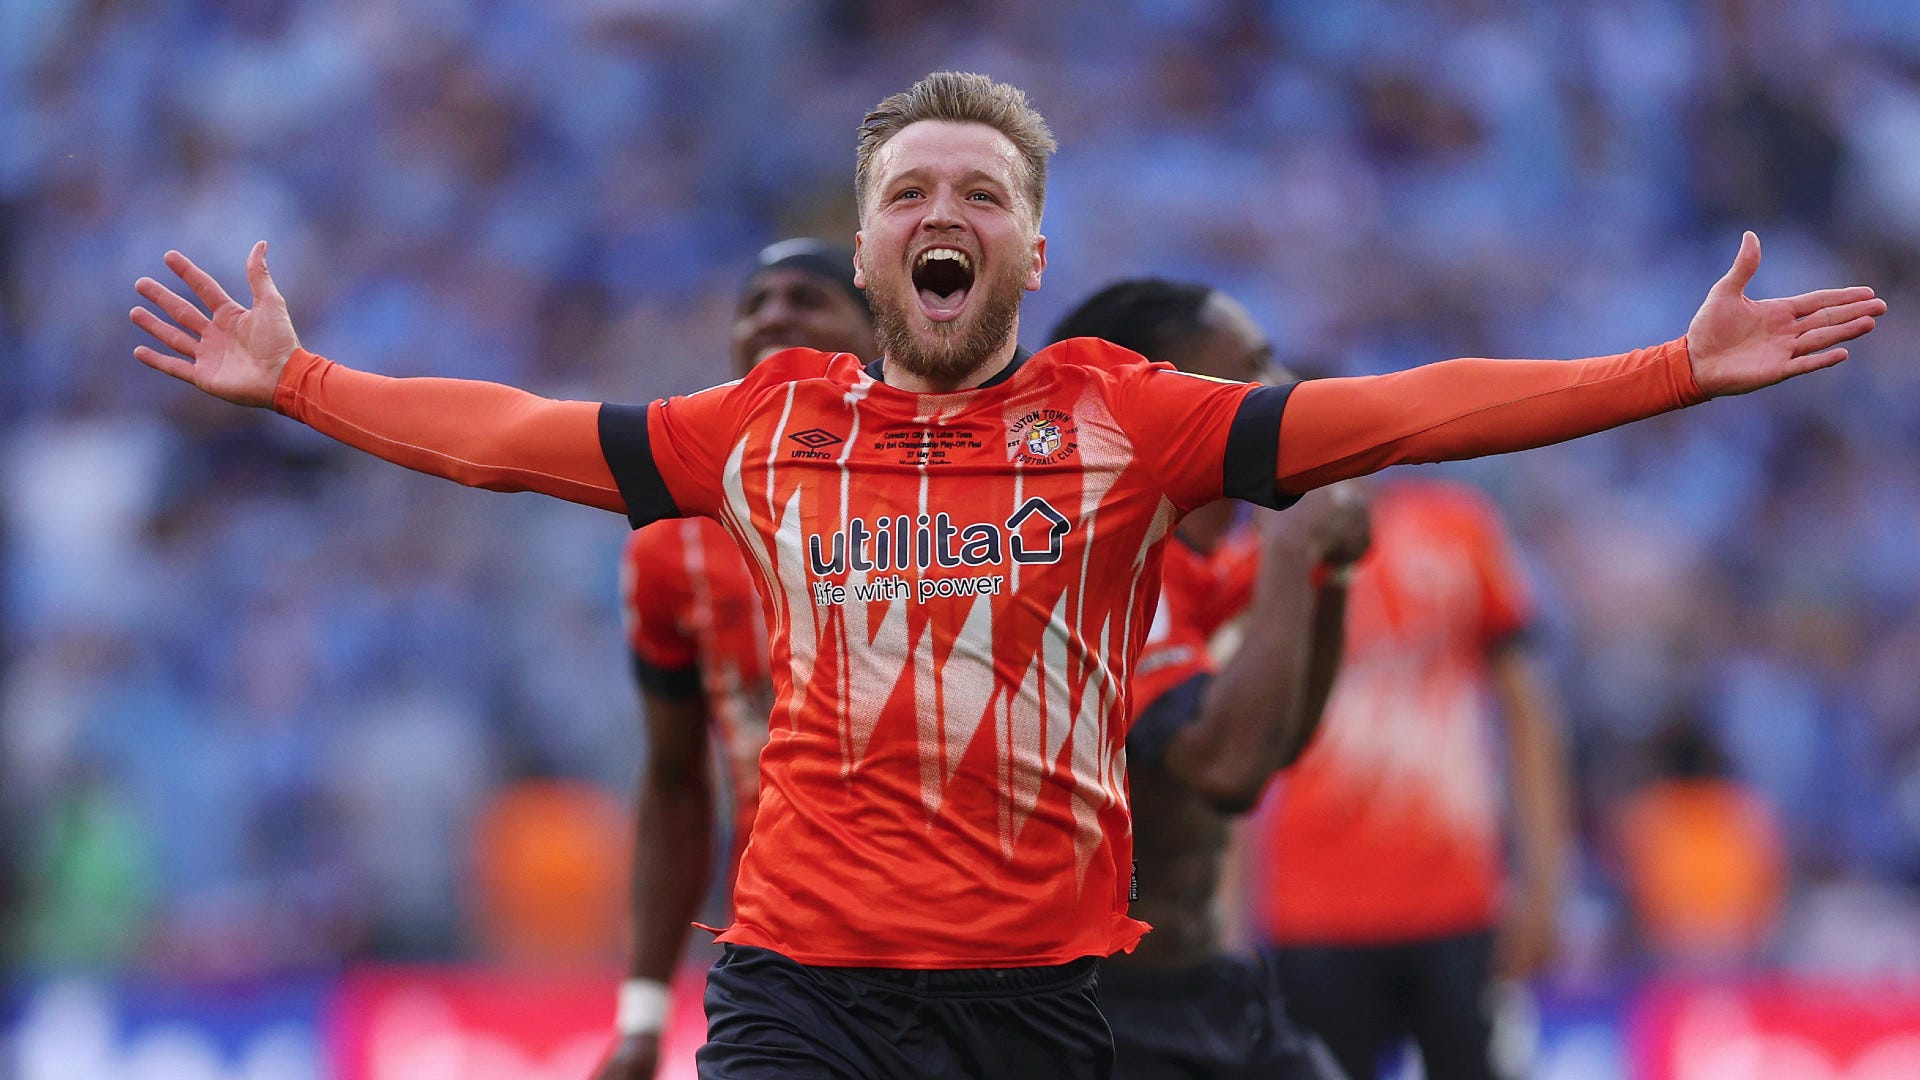 Luton are in the Premier League! Penalty shootout win against Coventry in Championship play-off final seals return to top-flight after 31-year absence